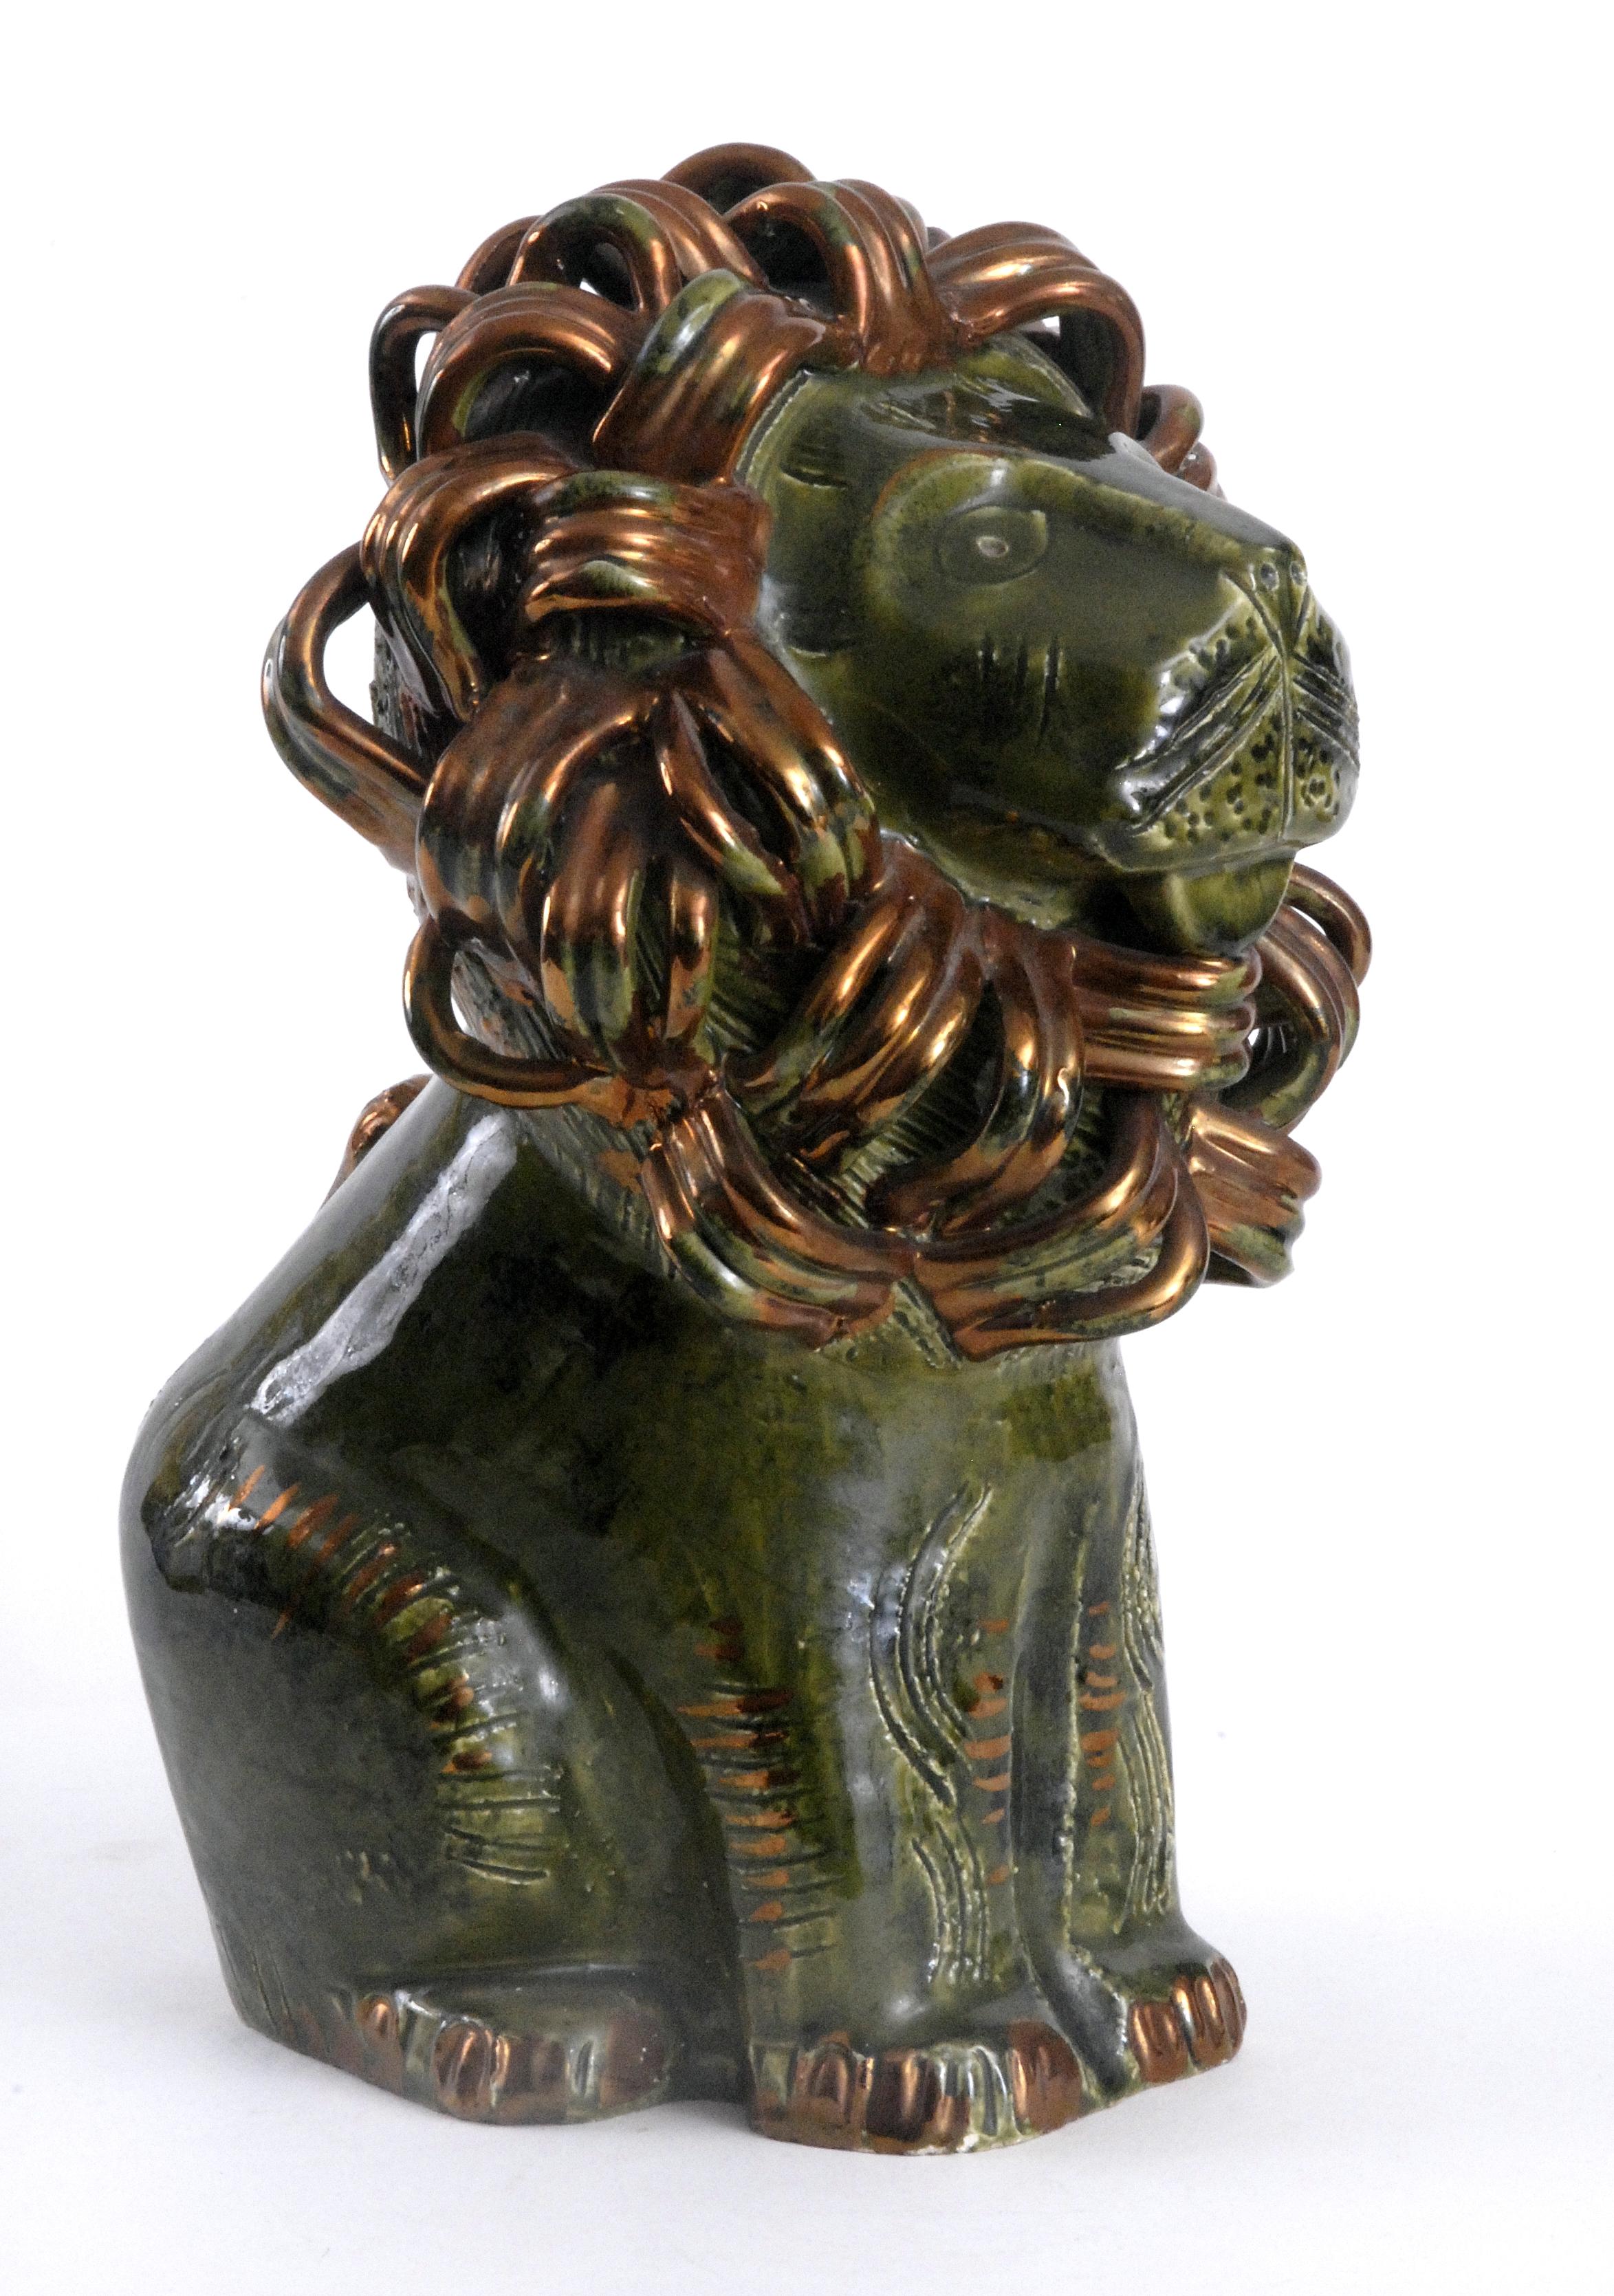 A magnificent large sitting green and gold lion with an intricately detailed mane in a copper/gold glaze. This would make a wonderful centre-piece for any collection of Italian ceramics. With original paper label to the underside.